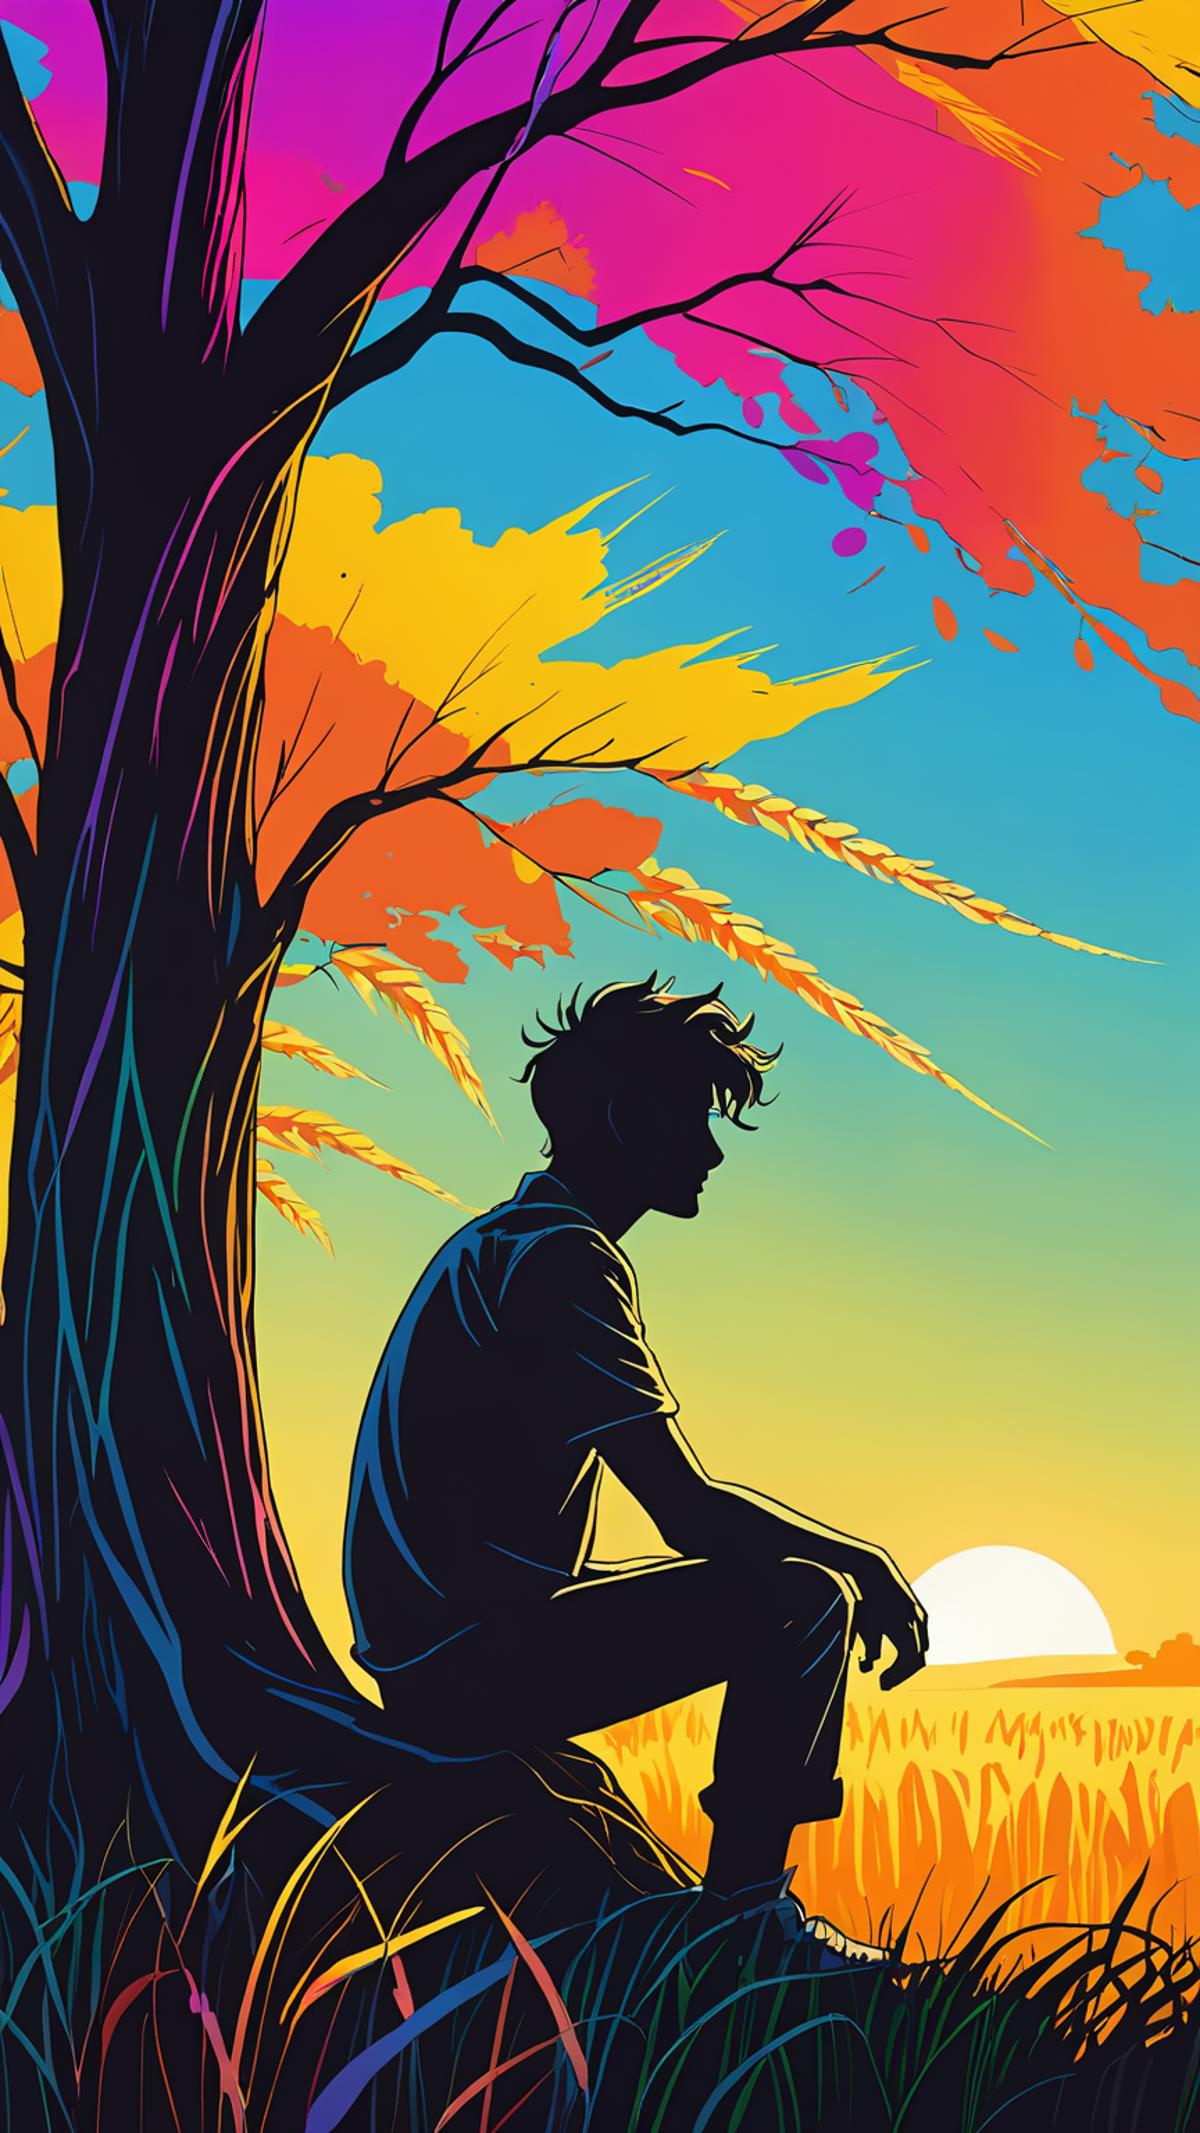 The Sun is Setting: A Man Sits on a Tree Branch